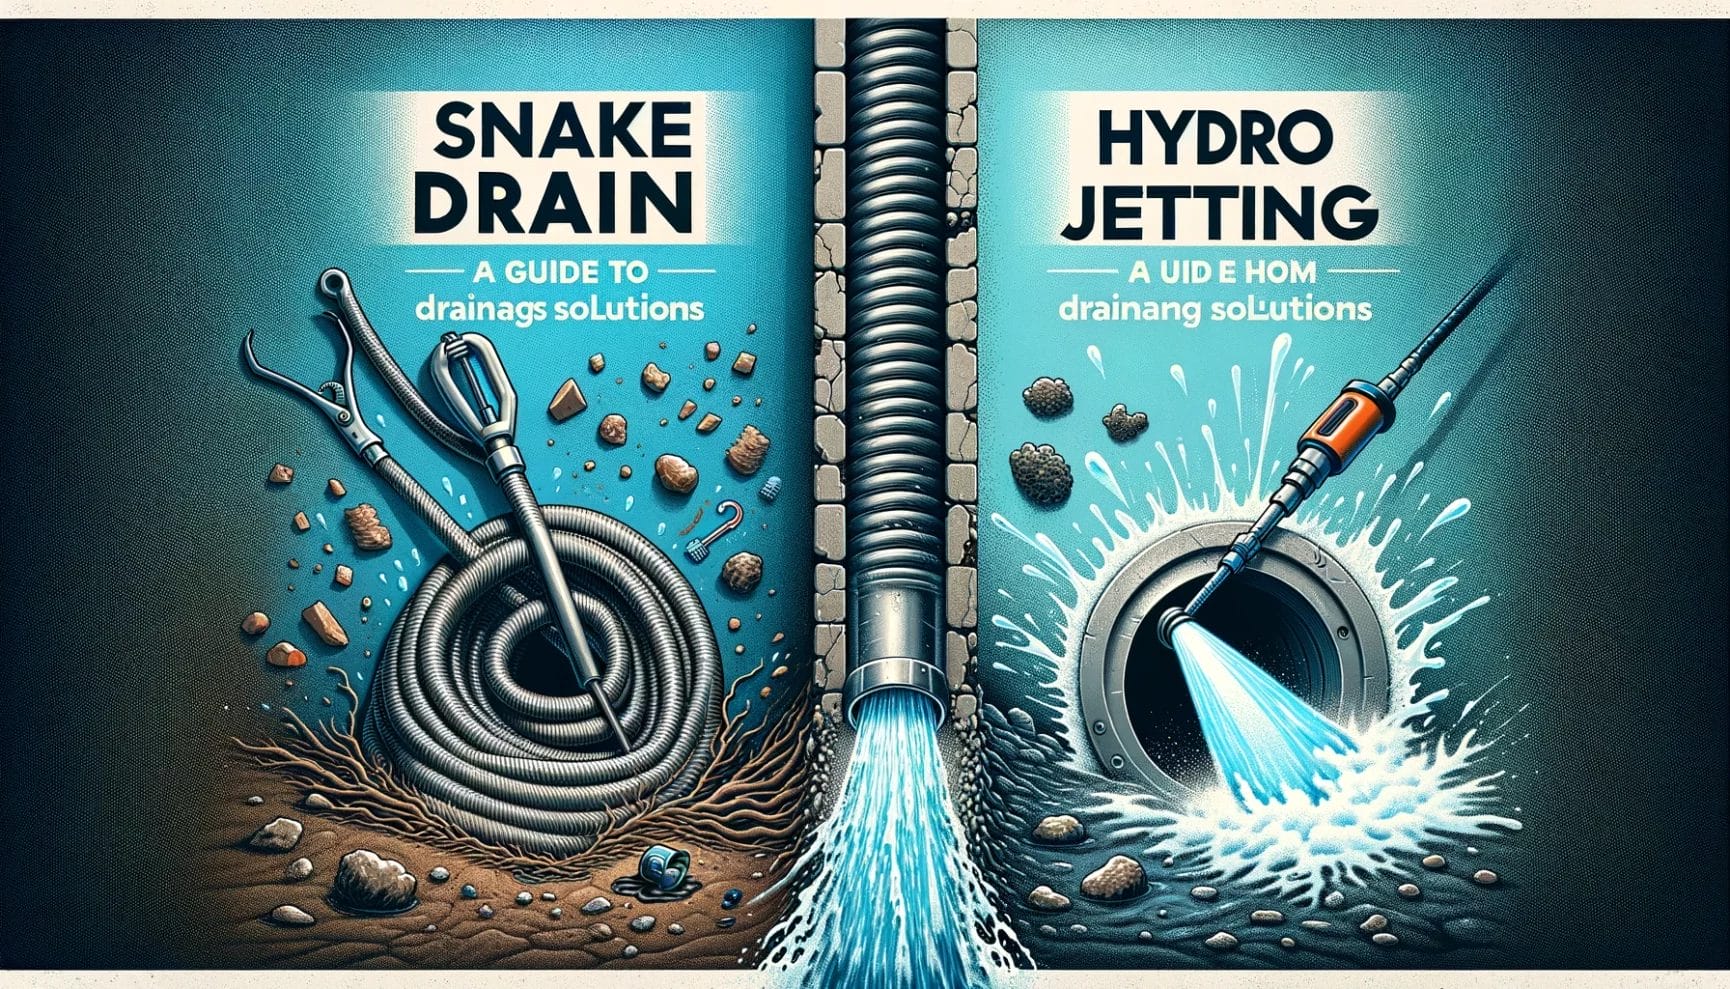 Graphic comparison of snake drain and hydro jetting methods for clearing clogged pipes.